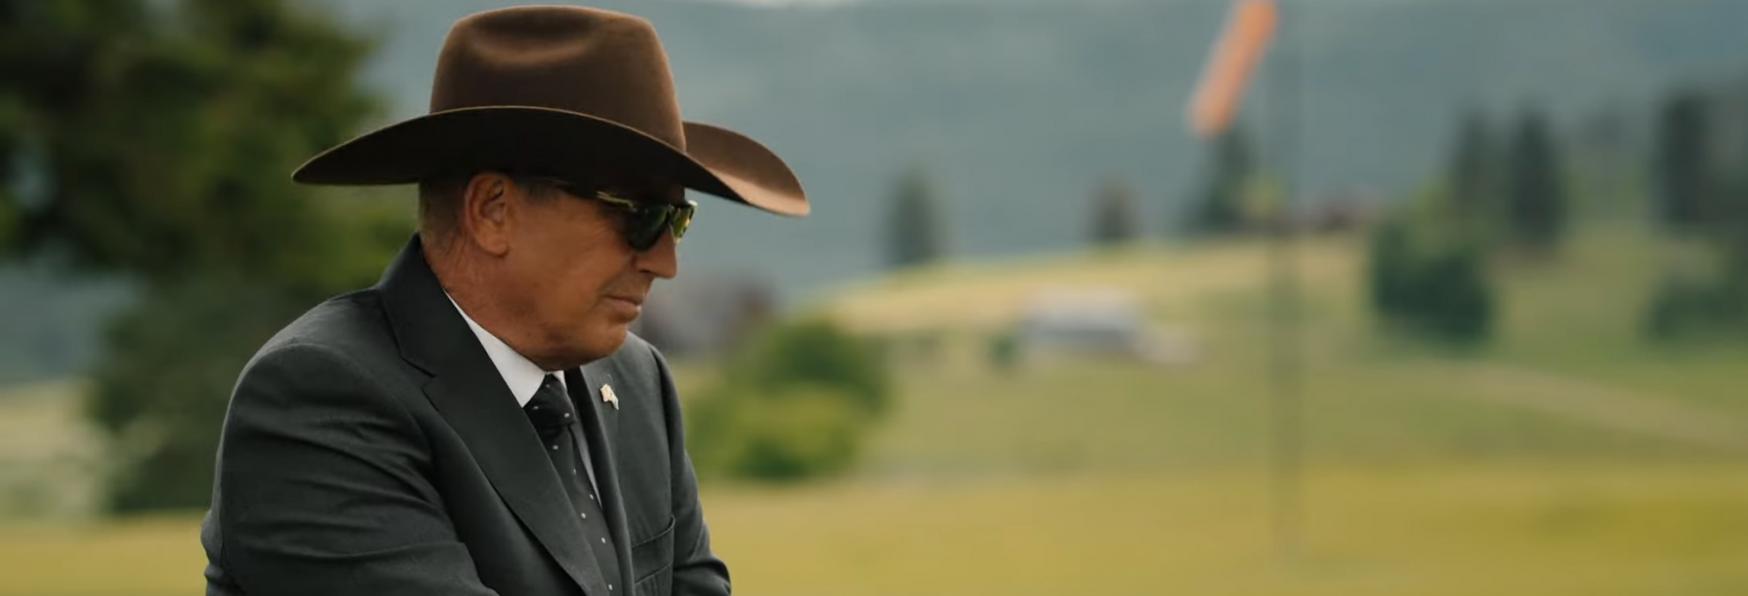 Yellowstone 5: Paramount Releases the Official Trailer for the Next Season